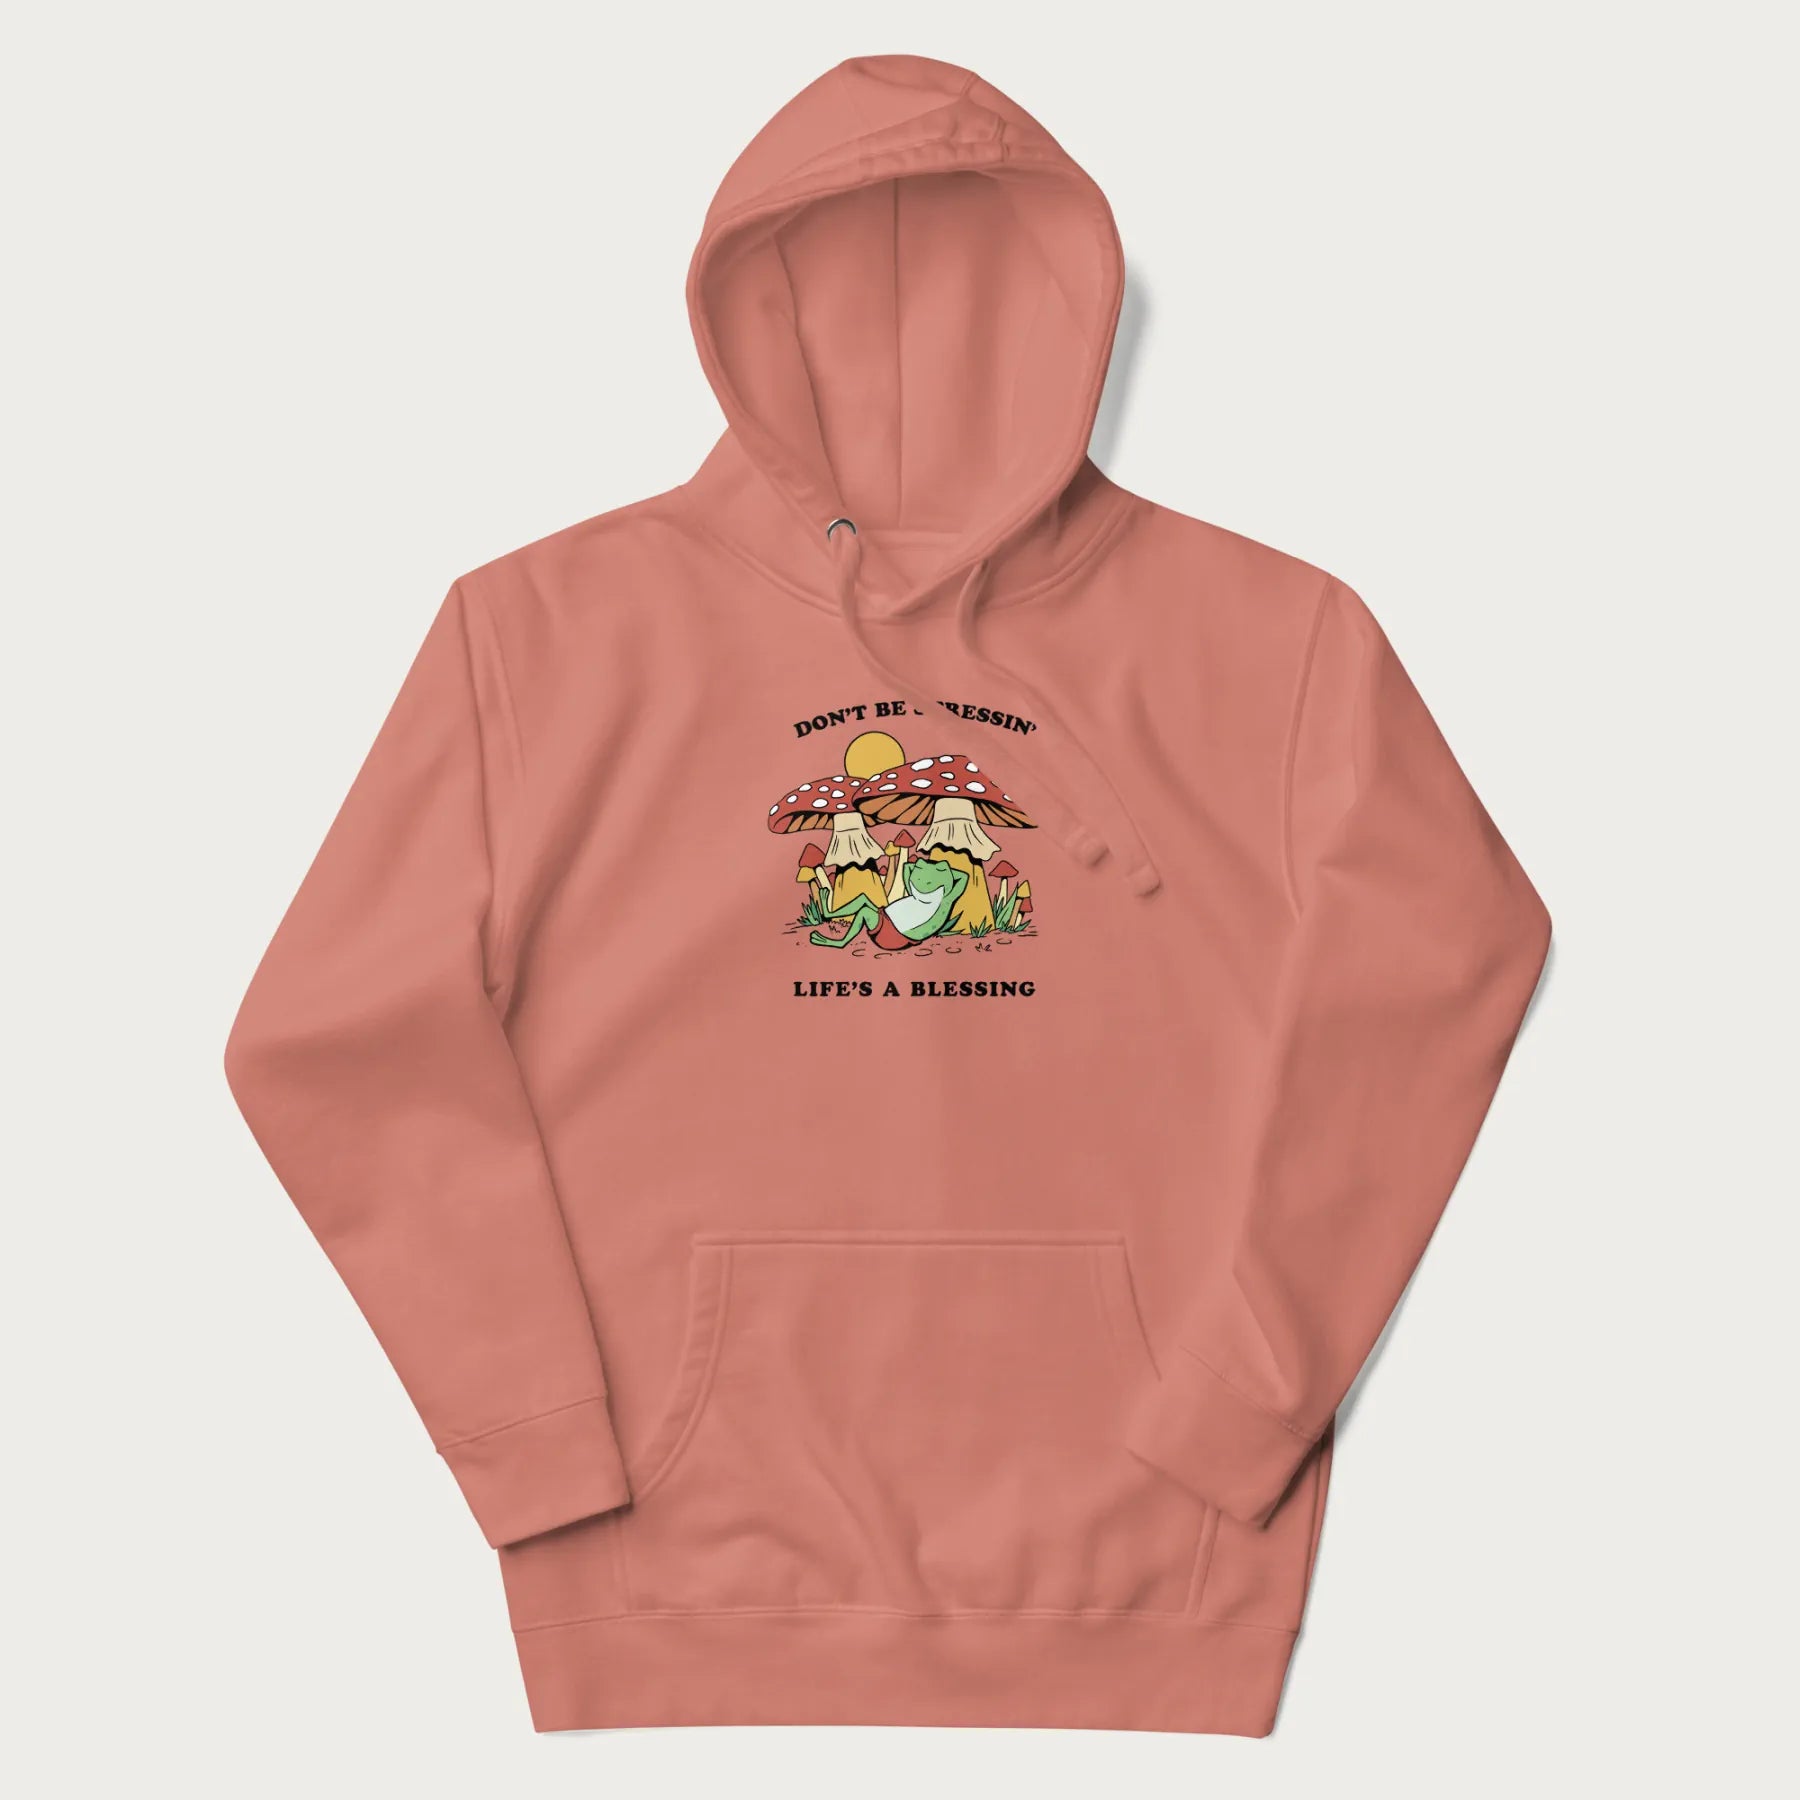 Light pink hoodie with a graphic of a frog lounging under mushrooms and the phrases 'Don't Be Stressin' Life's a Blessing'.